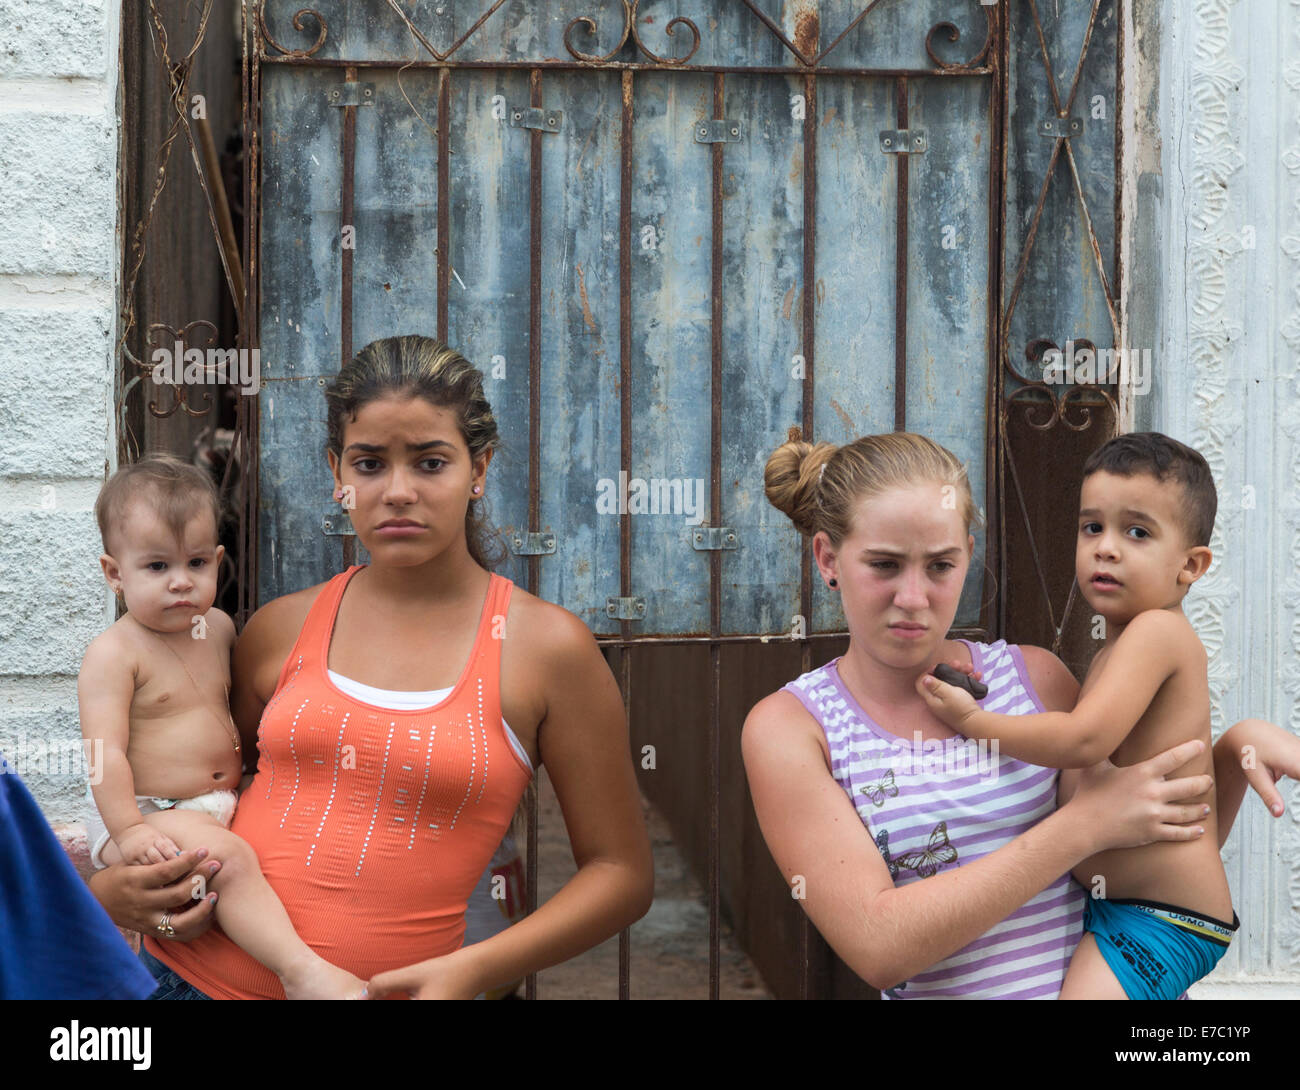 two young girls with babies, Trinidad, Cuba Stock Photo